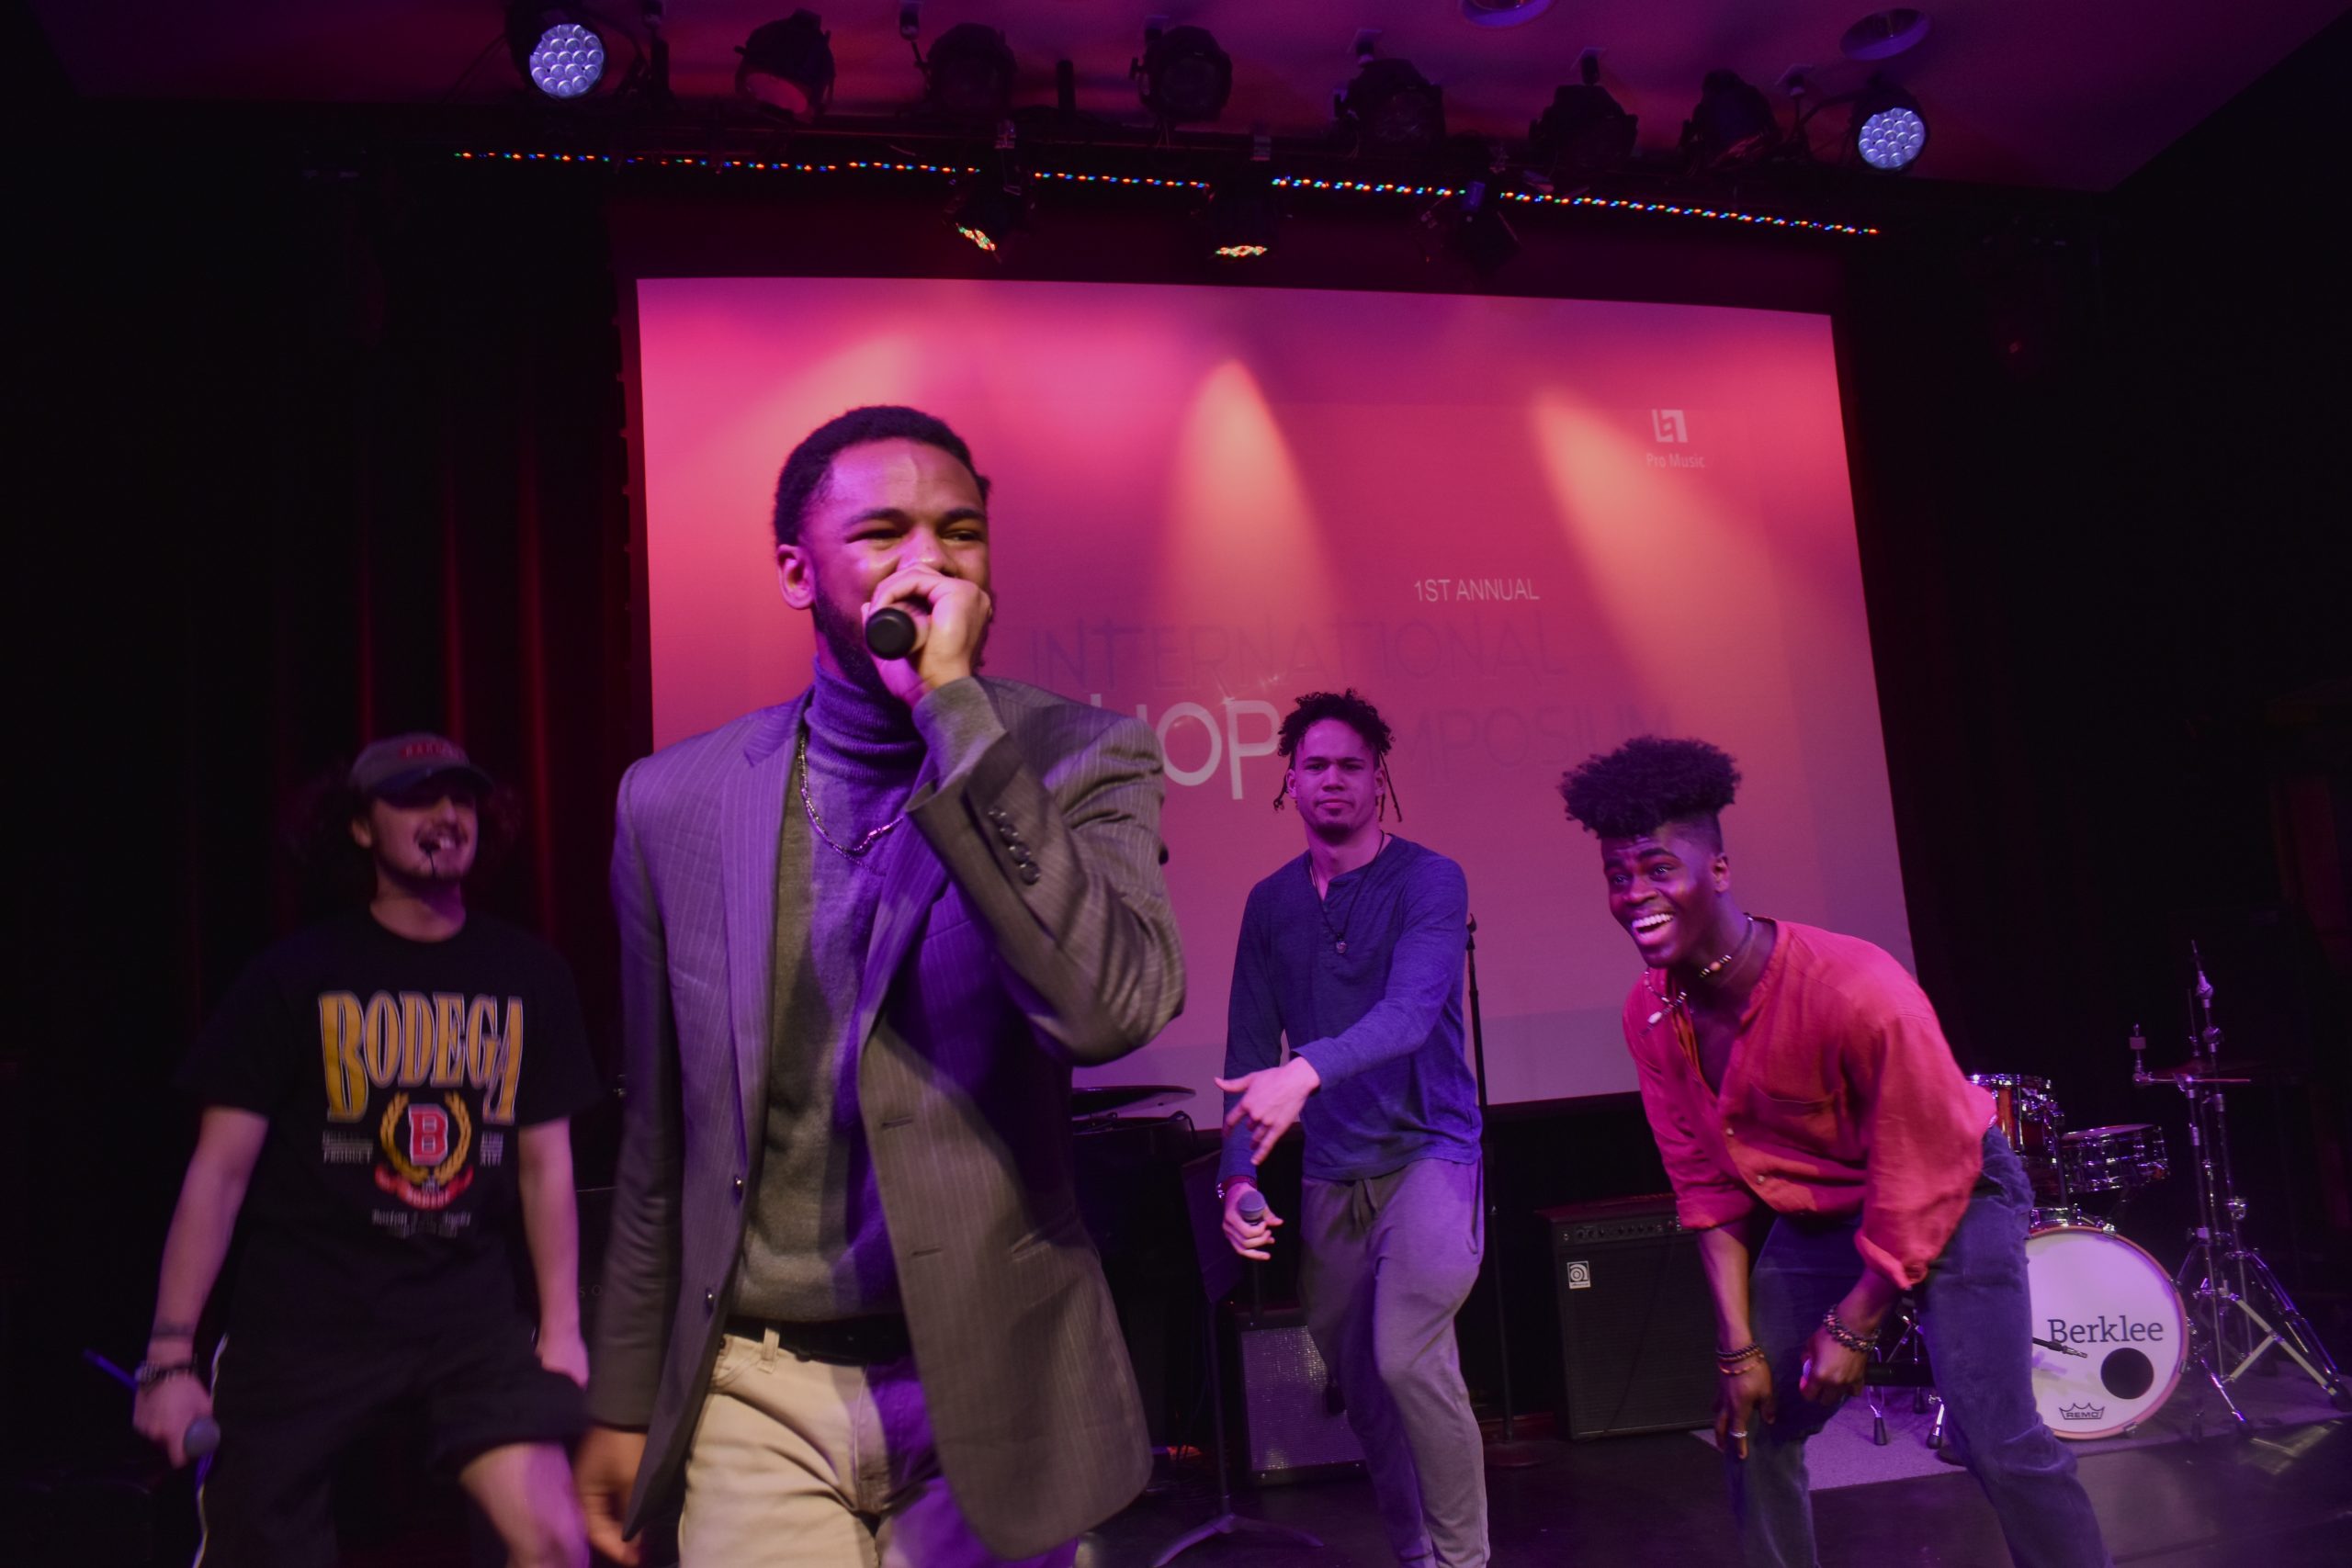 Emcee TA3 (center) ends the night performing with Aristotle Jones (left), MJangles (right) and Lil Xay (right of center) as the Berklee Cypher at the Berklee Hip Hop Symposium, April 12, 2022 (photo credit: Brandon Hill).